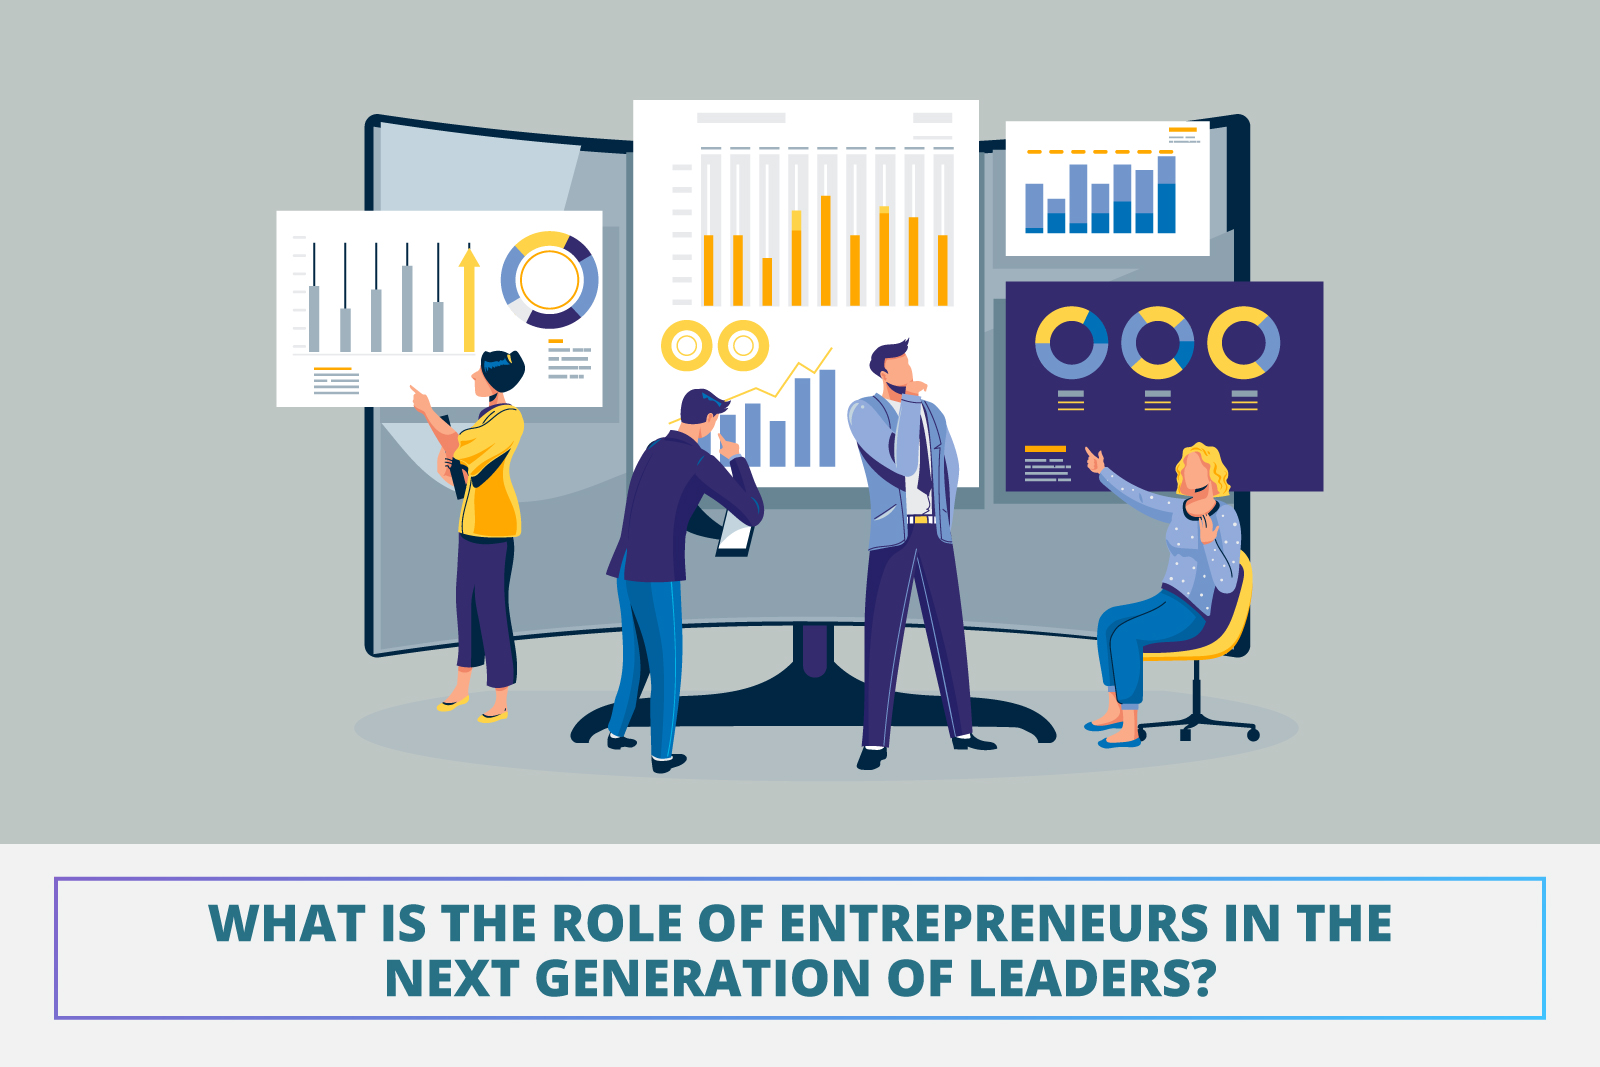 What is the role of entrepreneurs in the next generation of leaders?